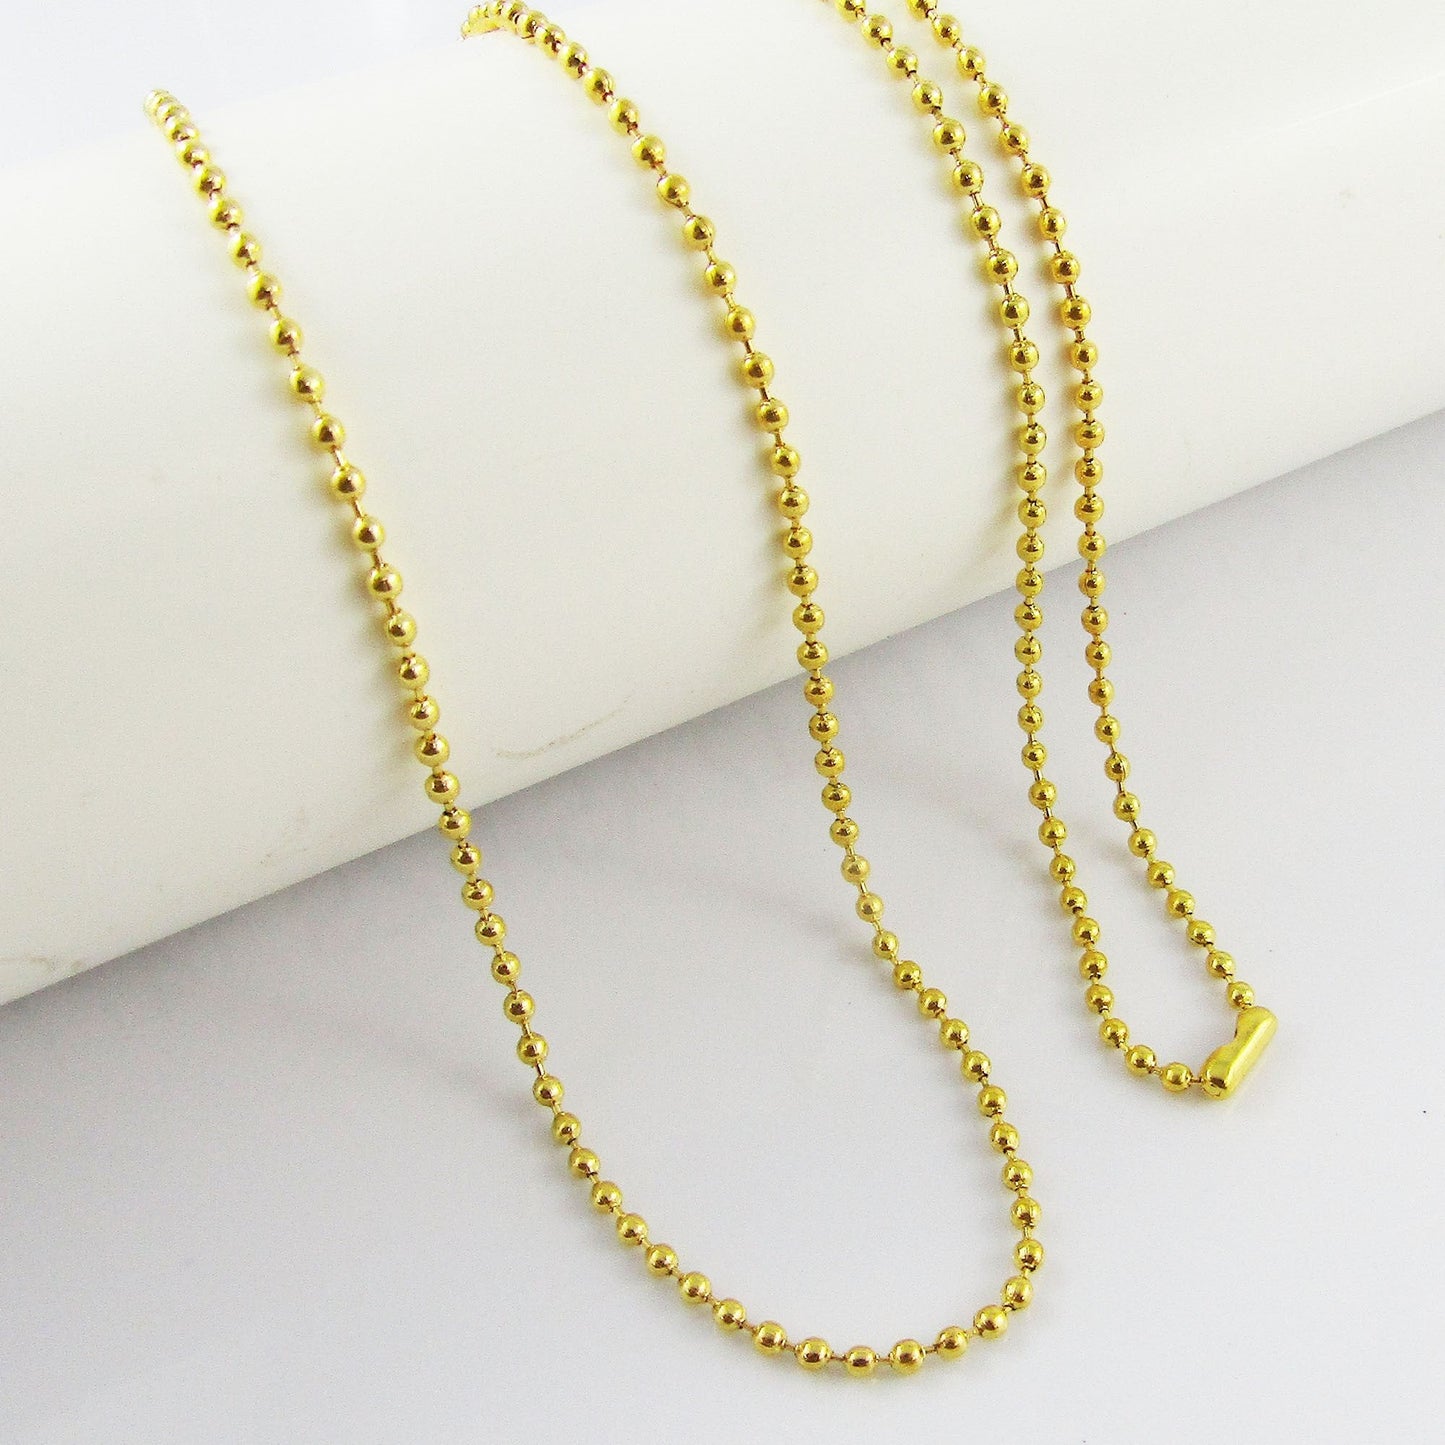 Bulk 12pcs Ball Chain Necklace 80cm Gold Plated Alloy